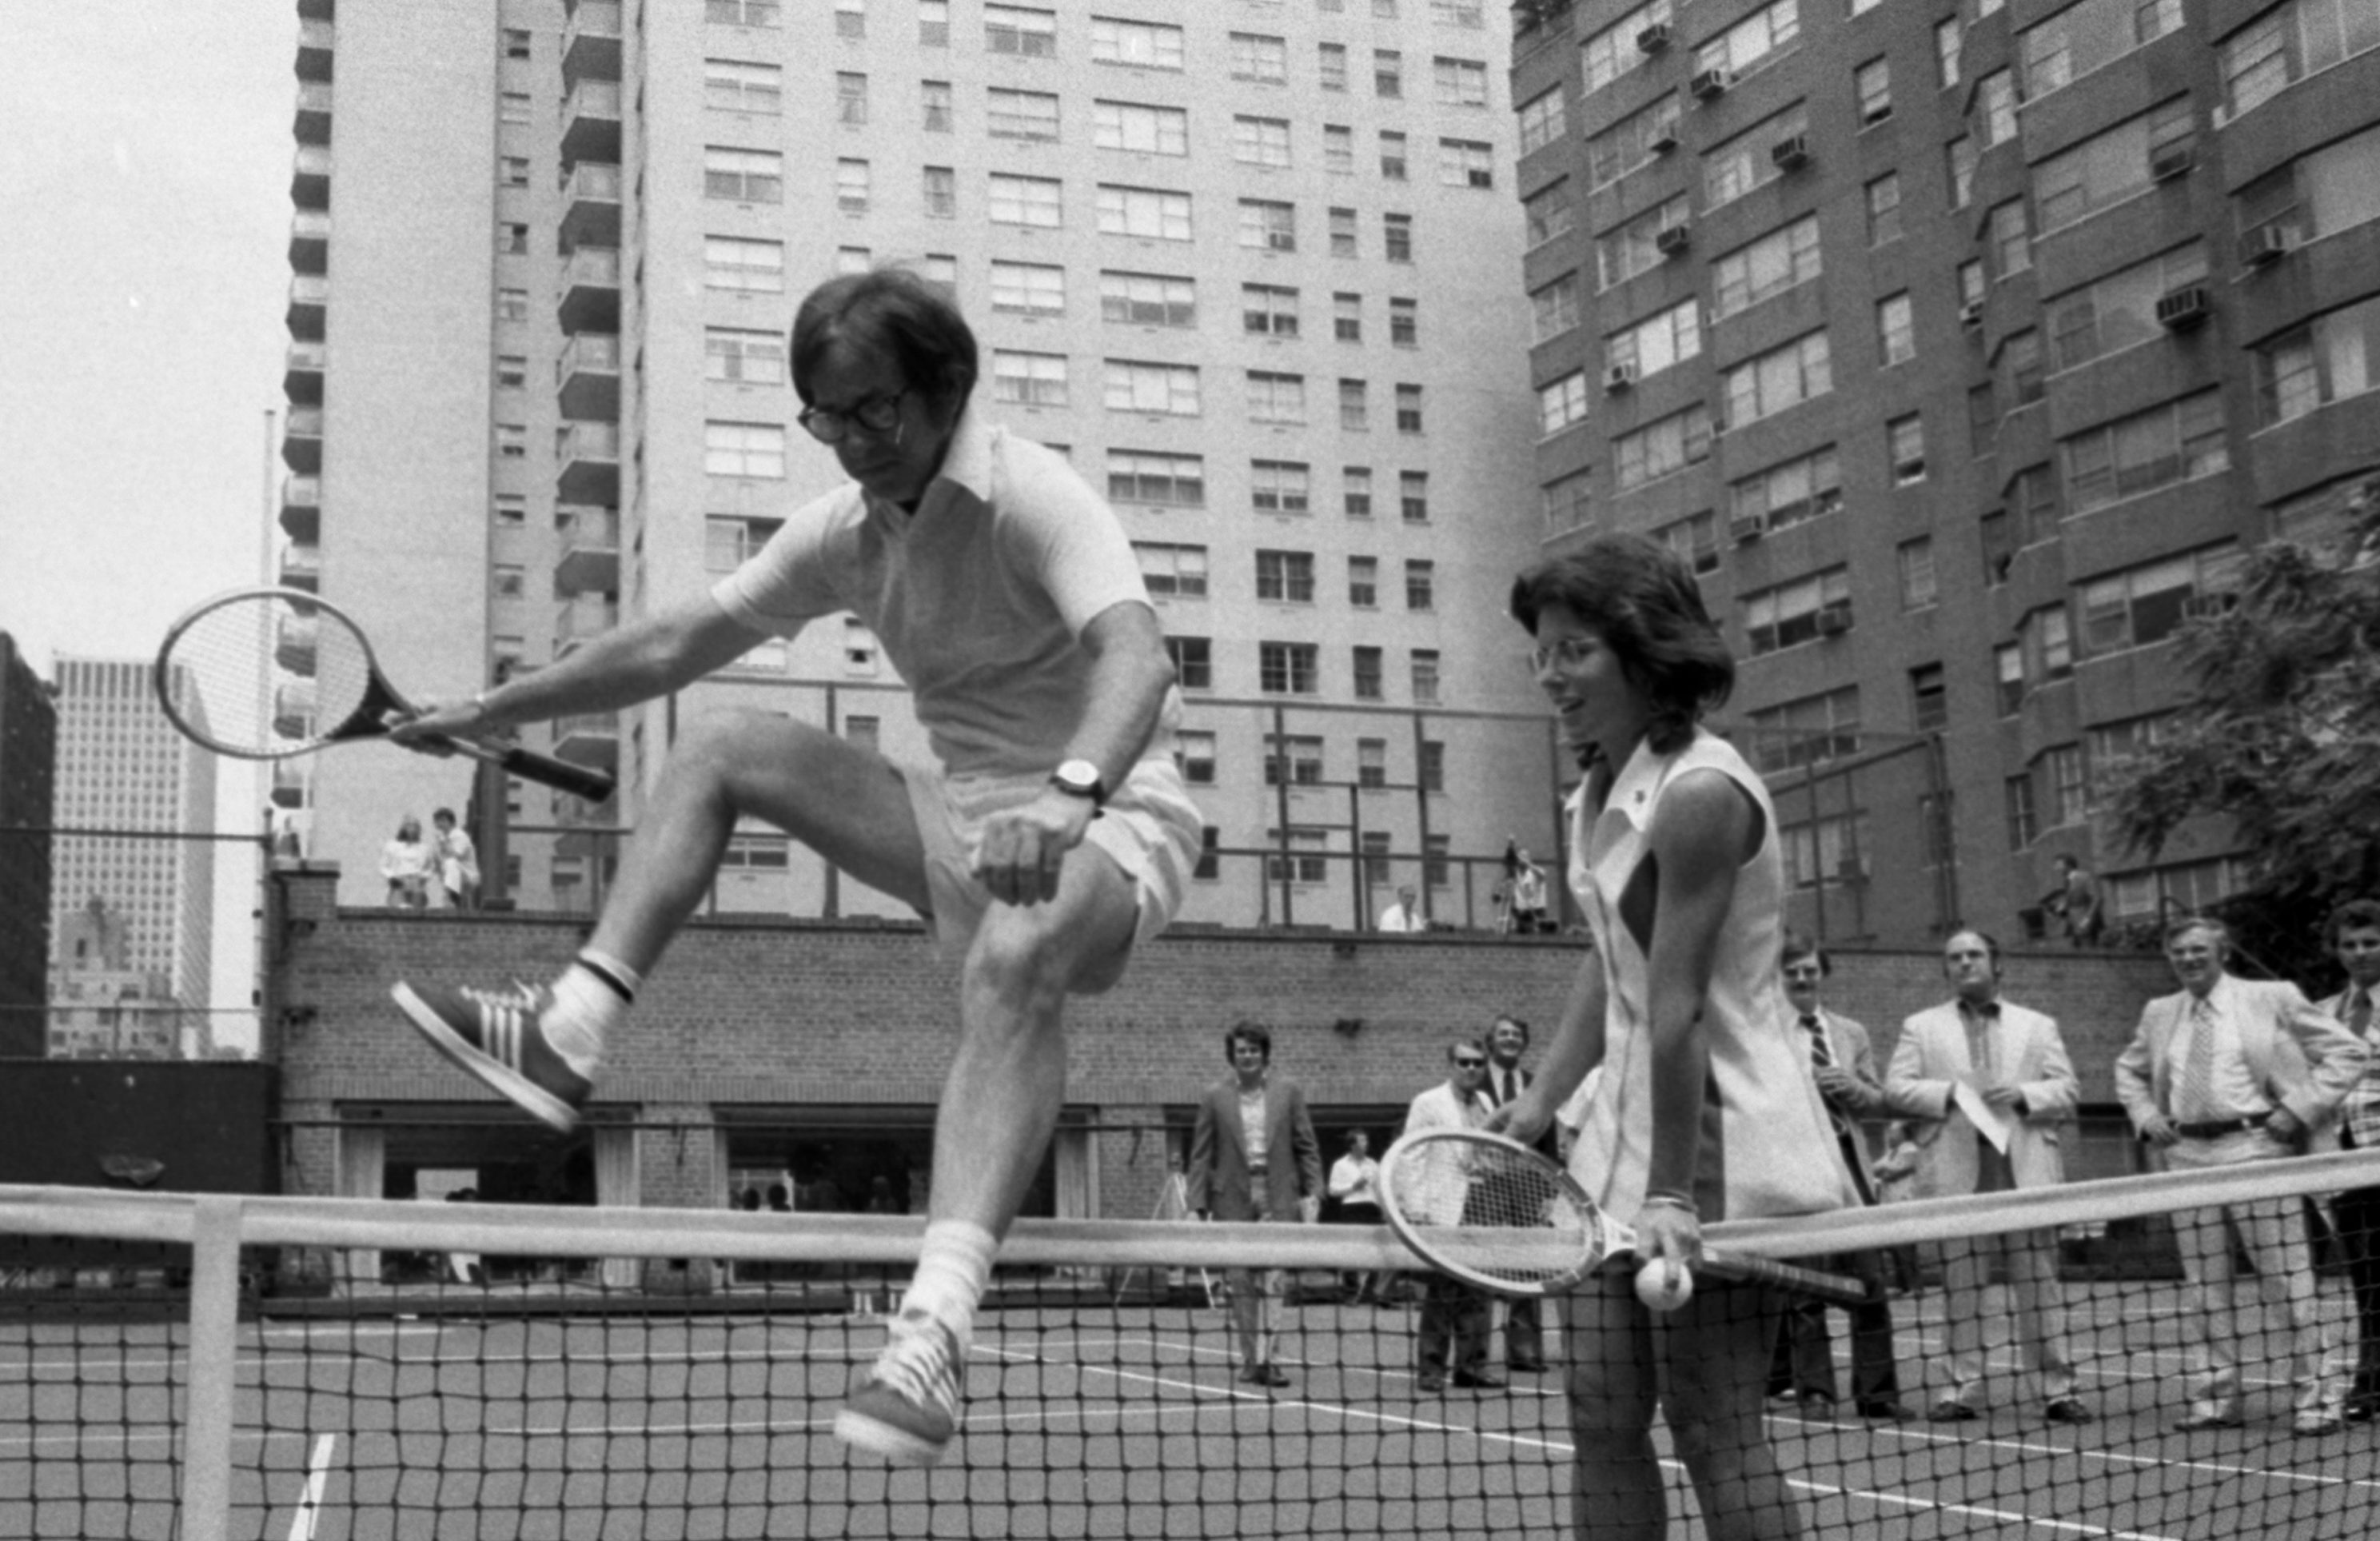 Battle of the Sexes Movie vs the True Story of Billie Jean King, Bobby Riggs